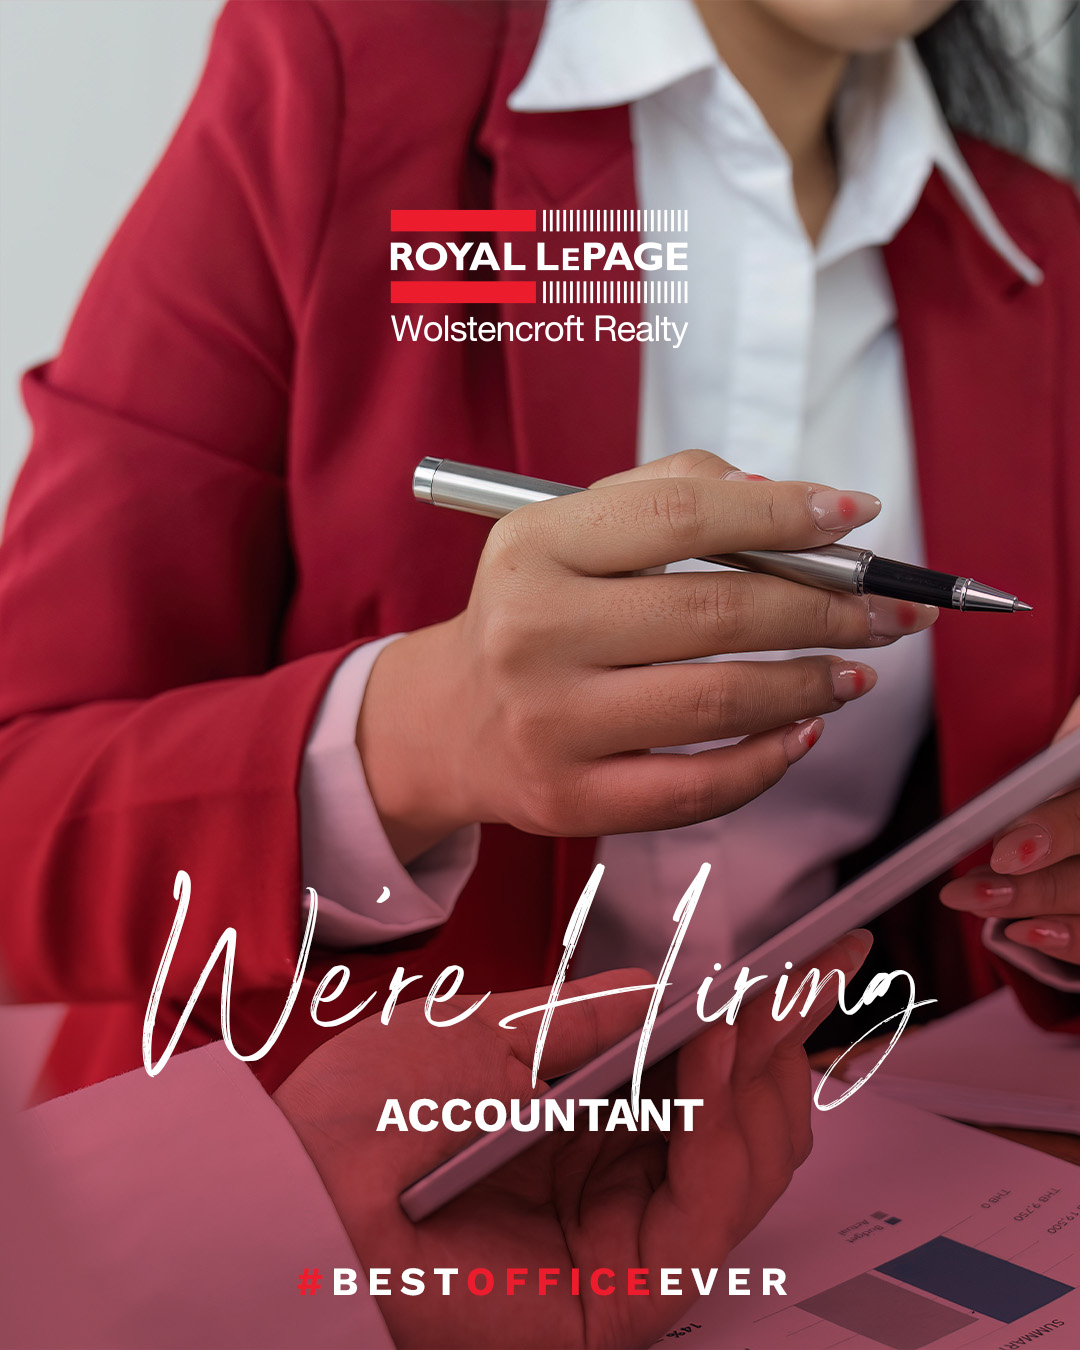 Join Our Team - We're Hiring an Accountant